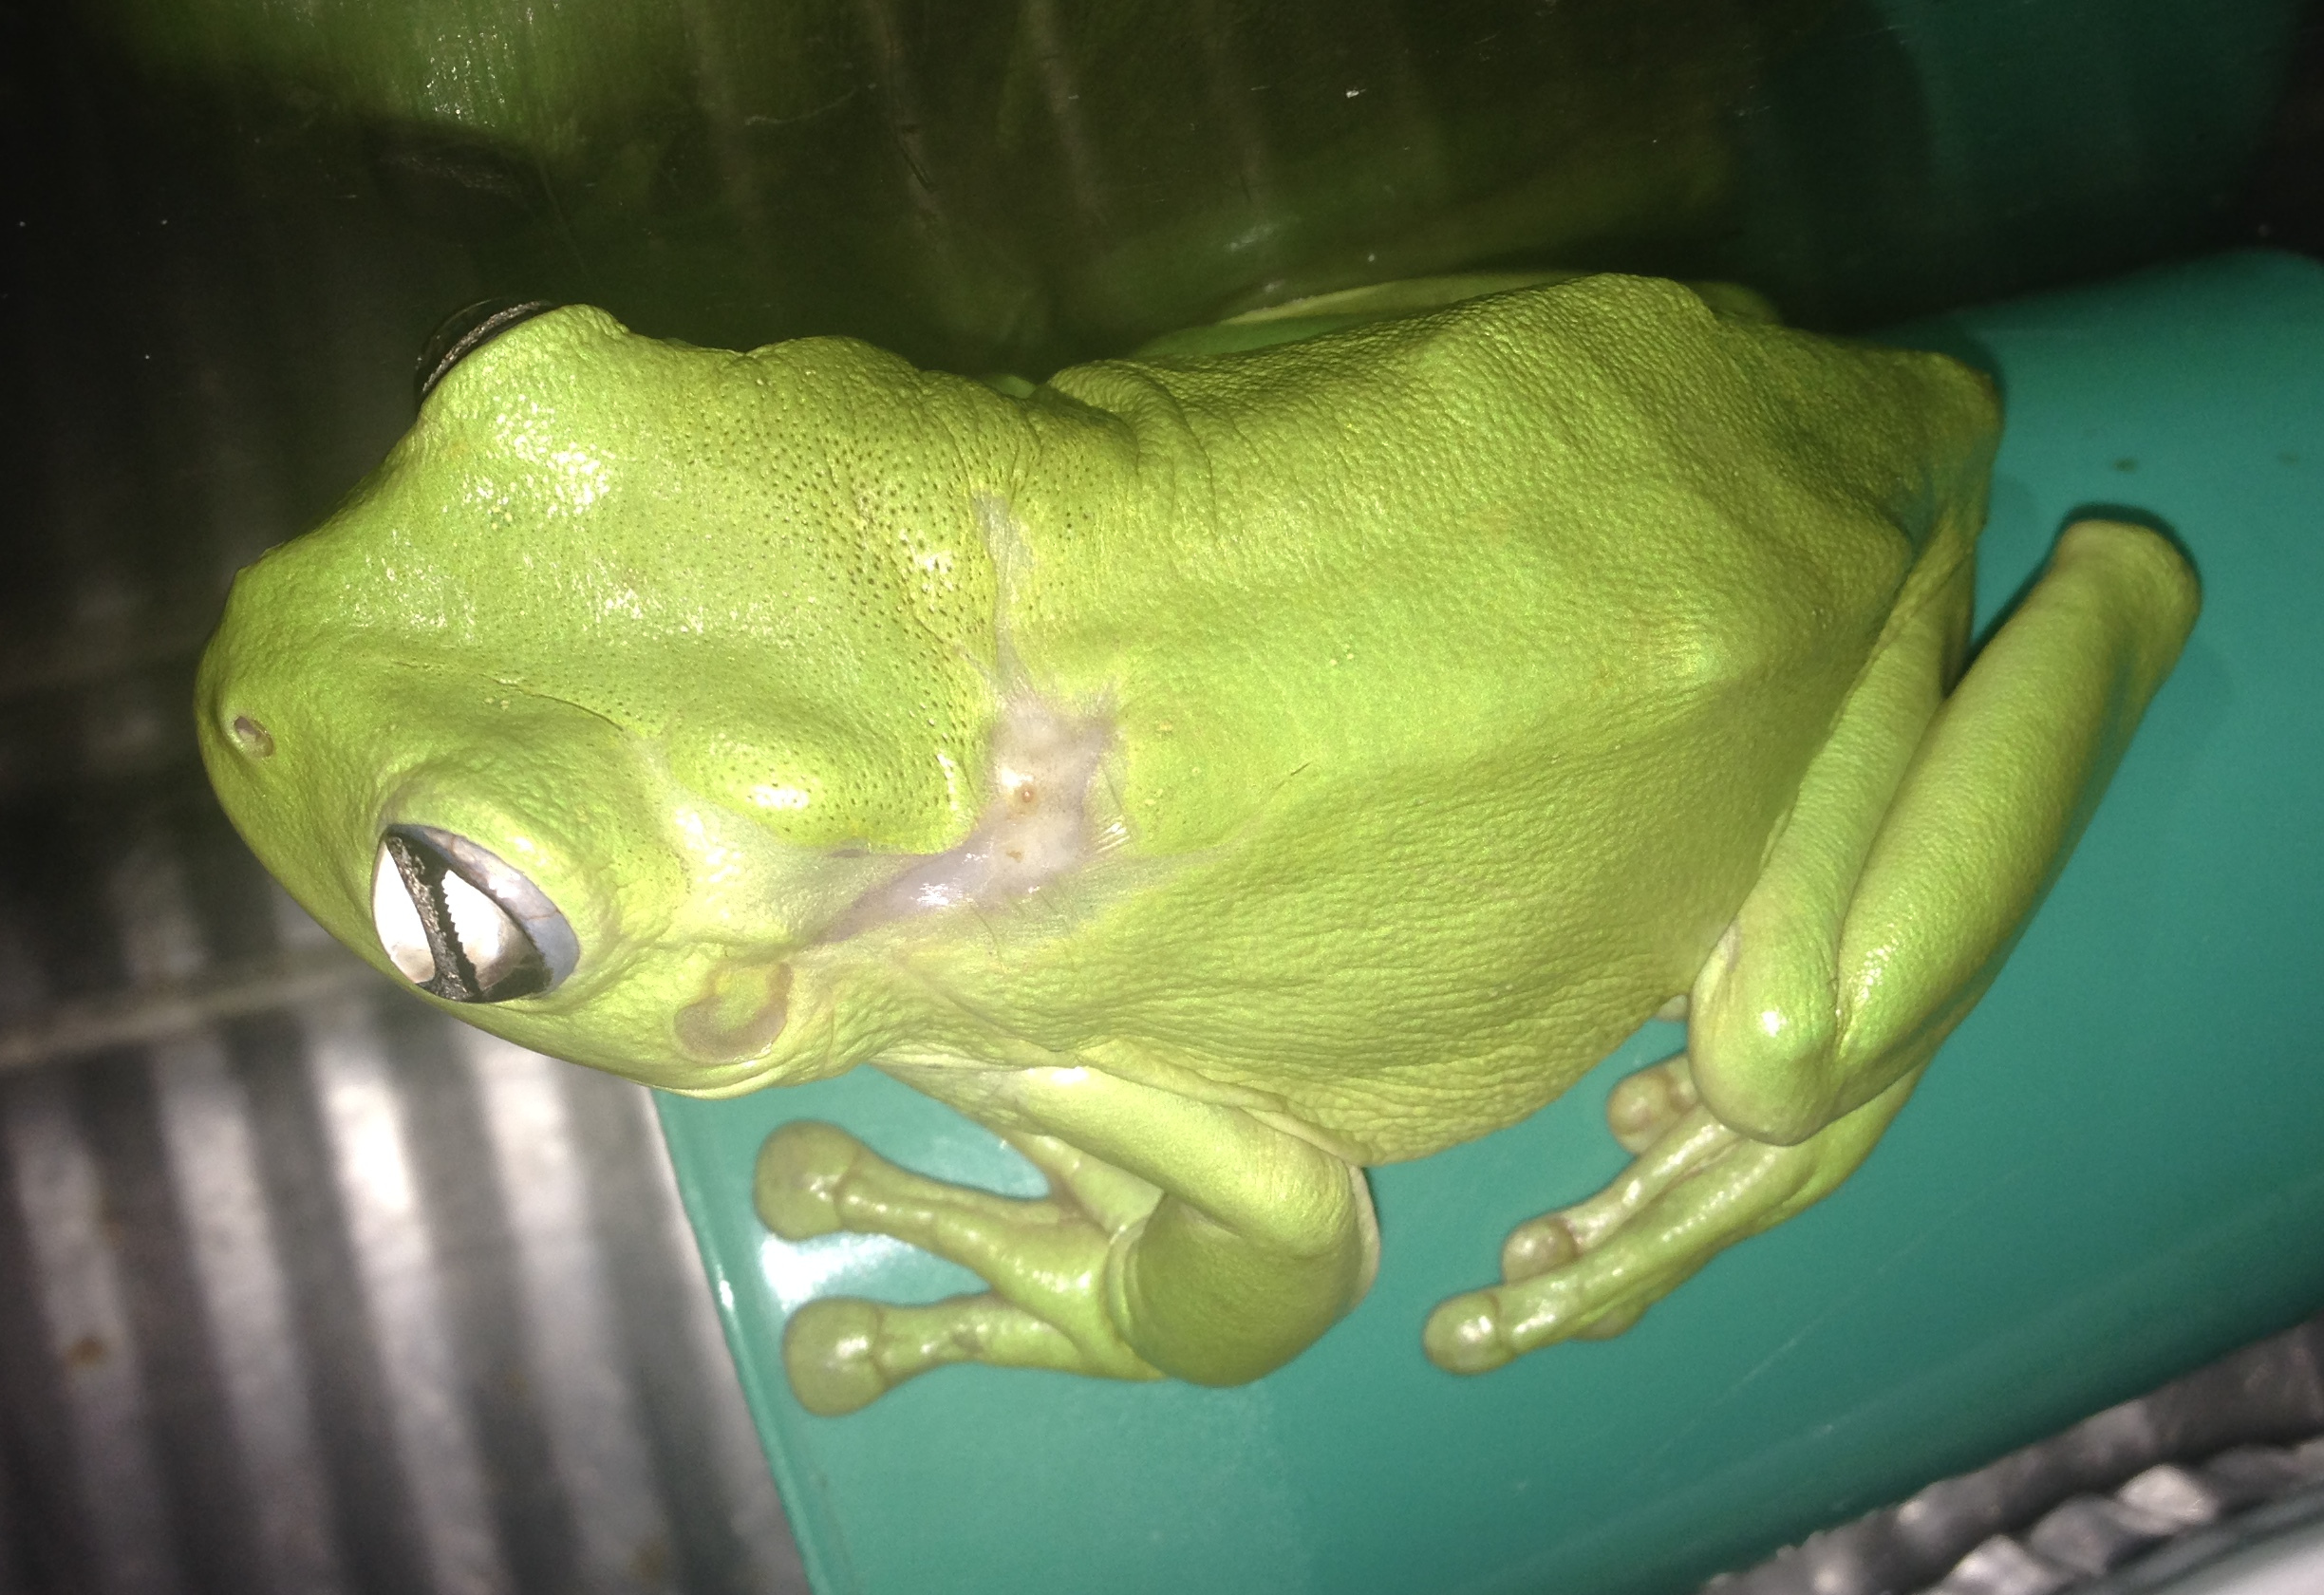 PHOTO: The green frog is seen here four weeks after treatment.